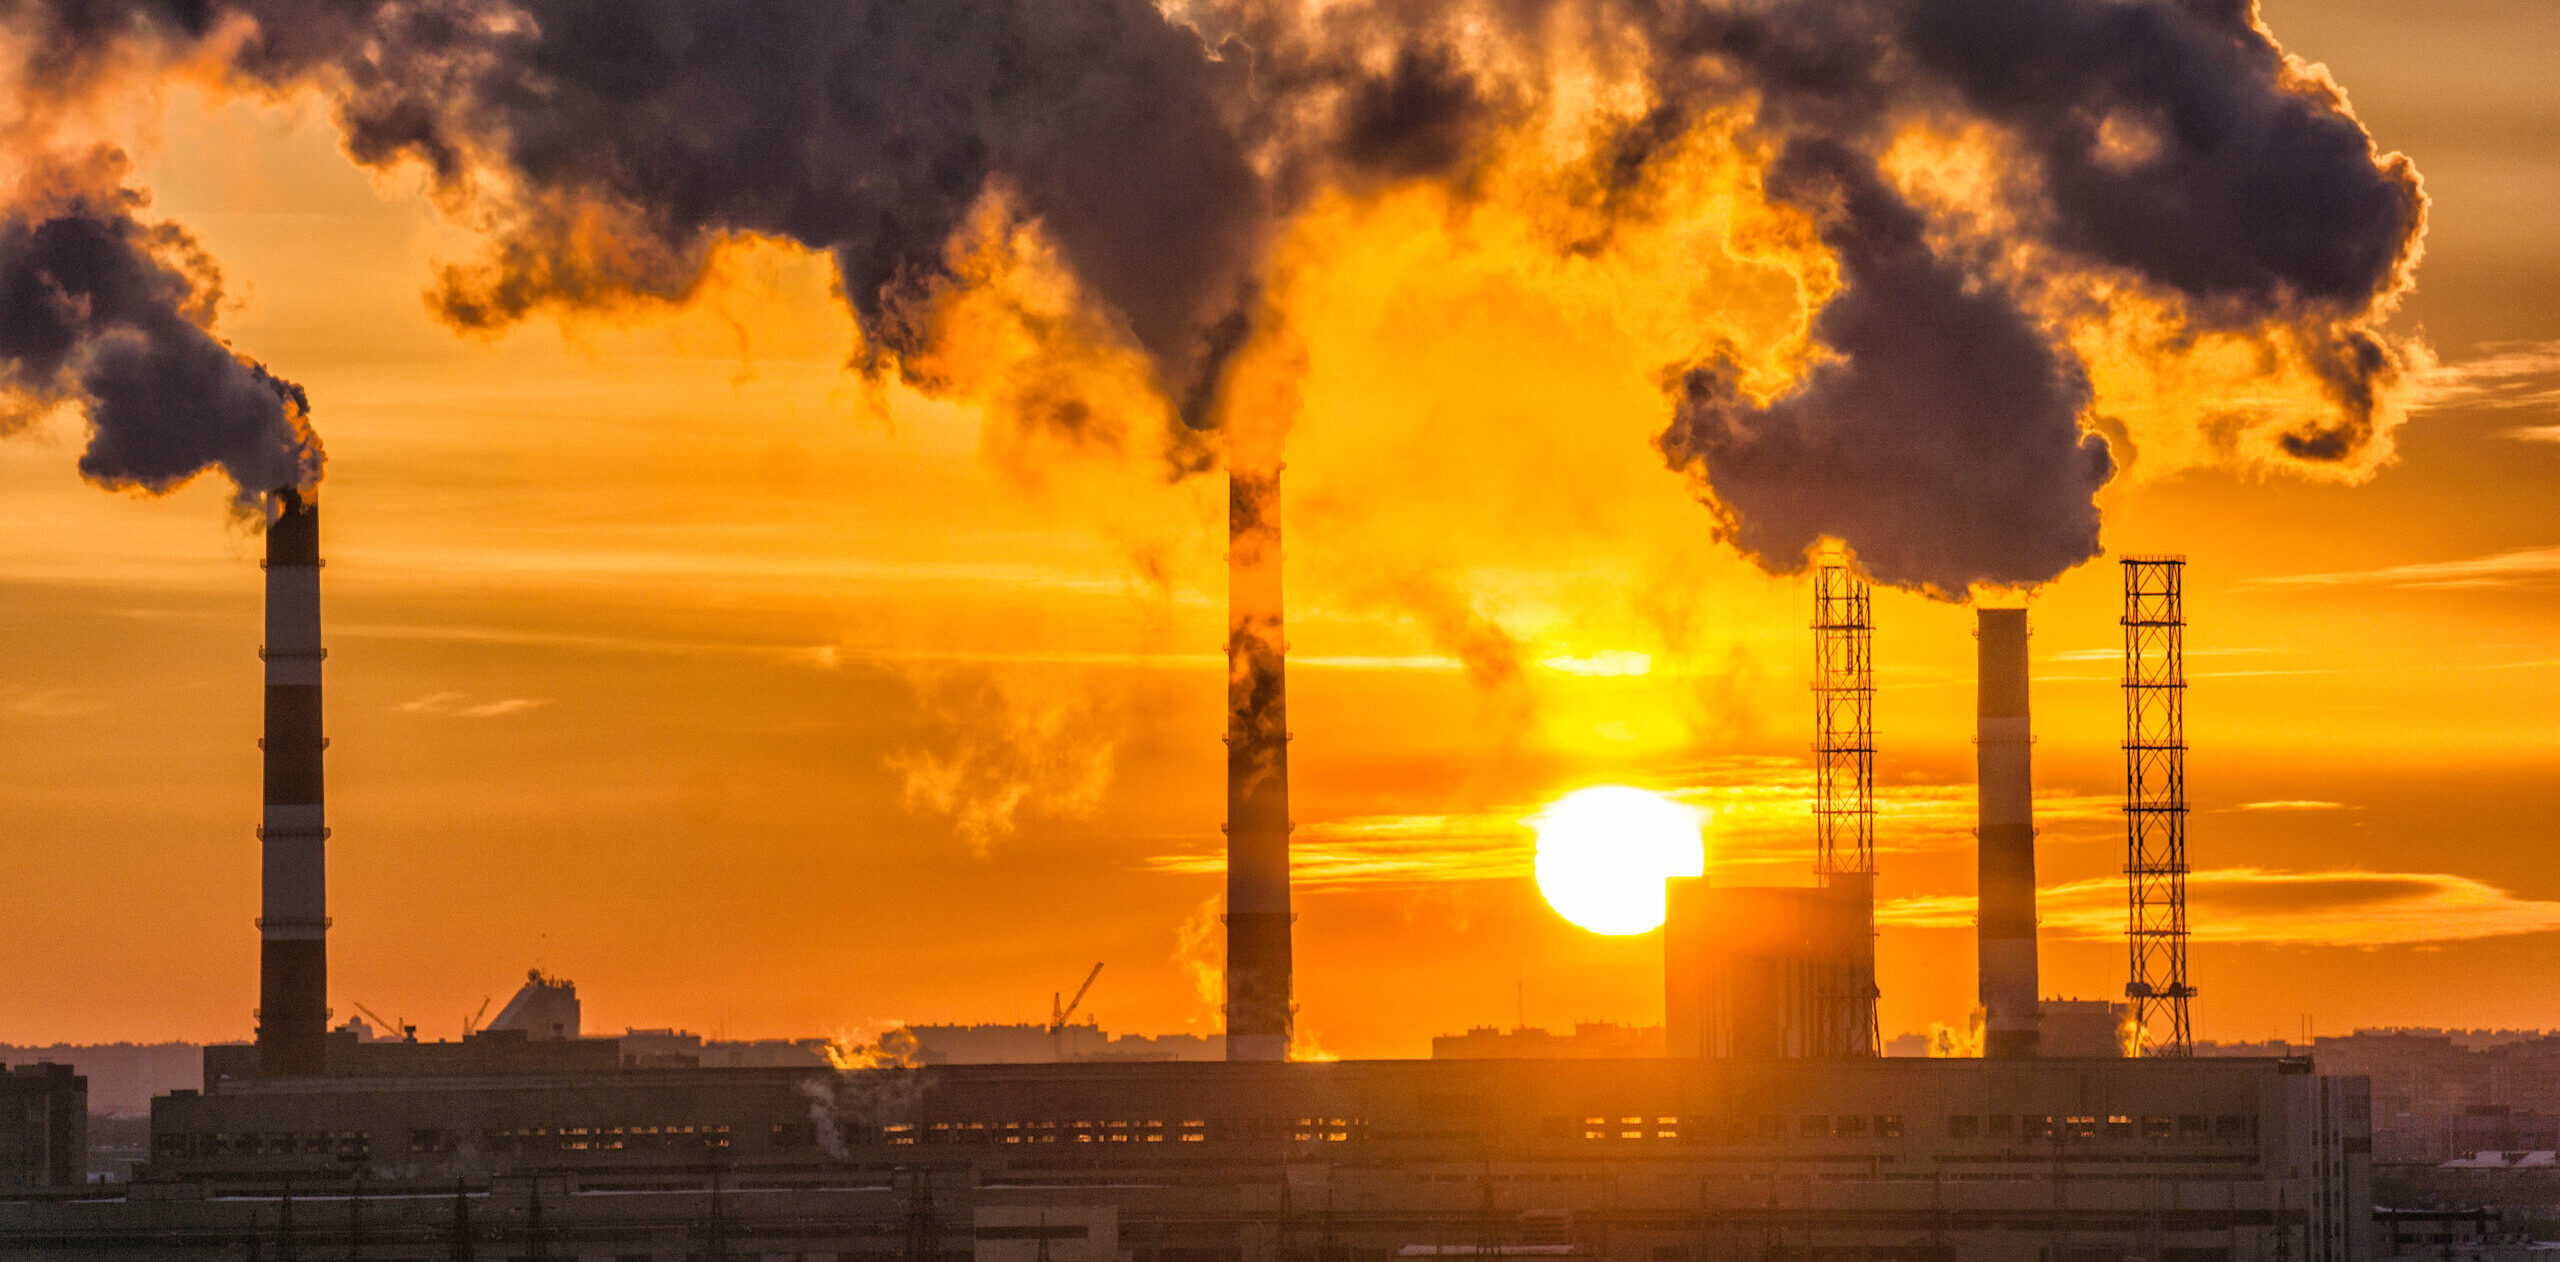 image: factory smokestacks release smoke into the air during sunset.